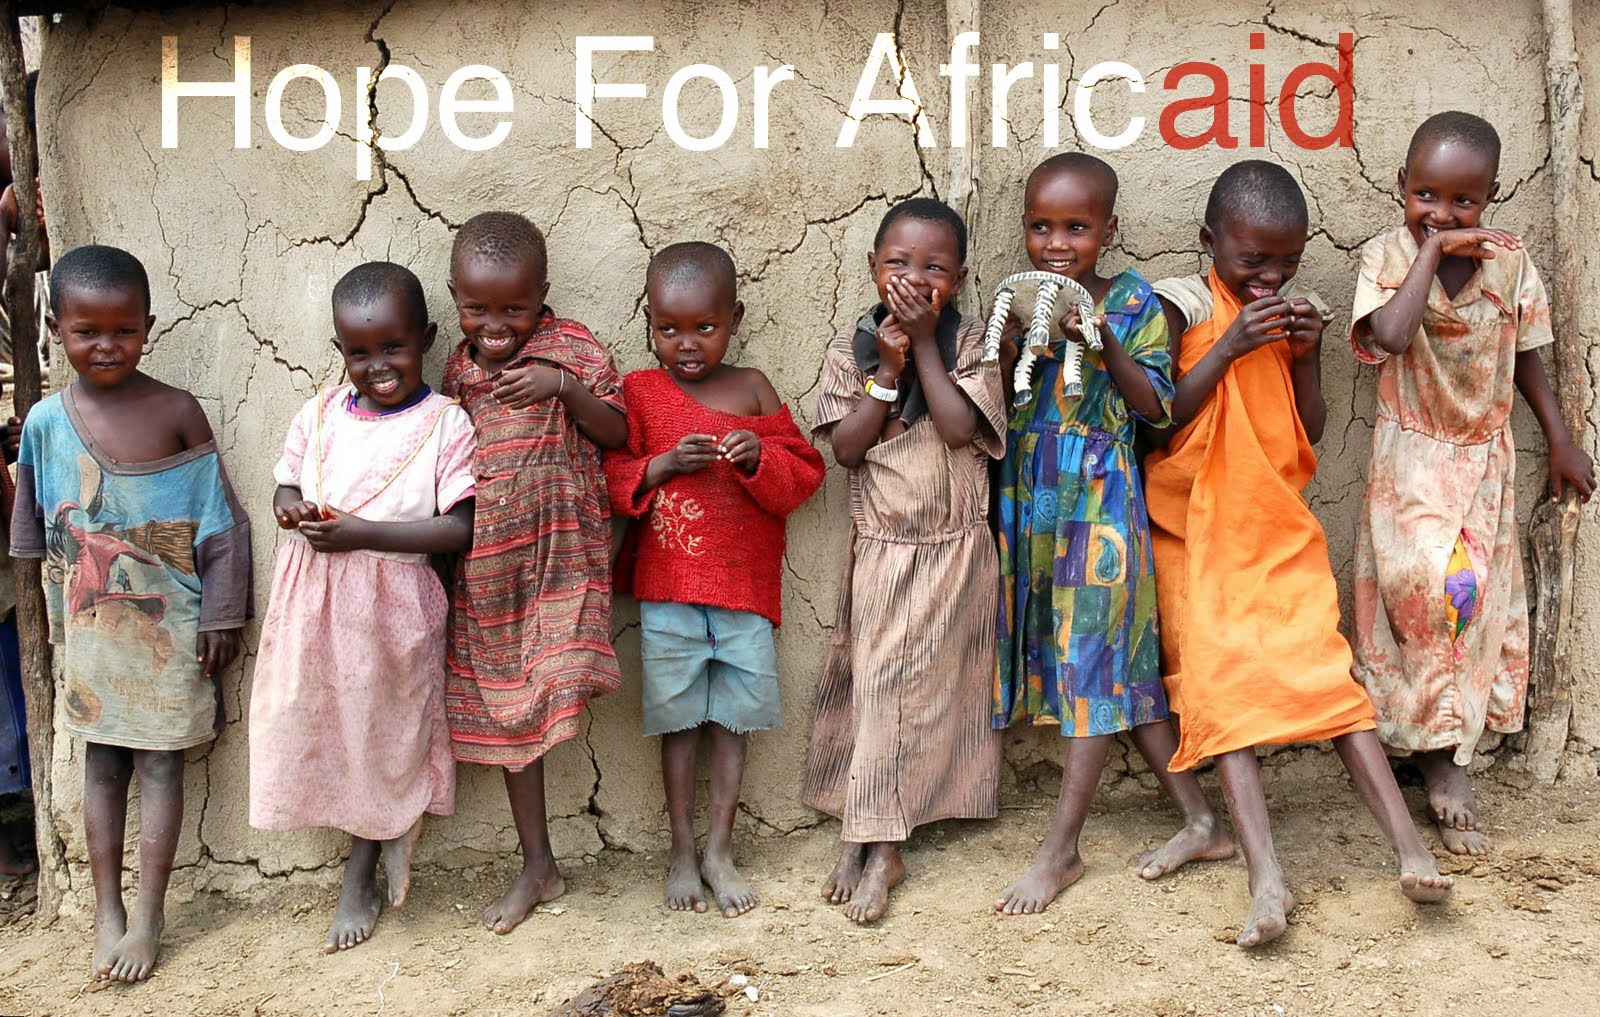 Hope For Africaid